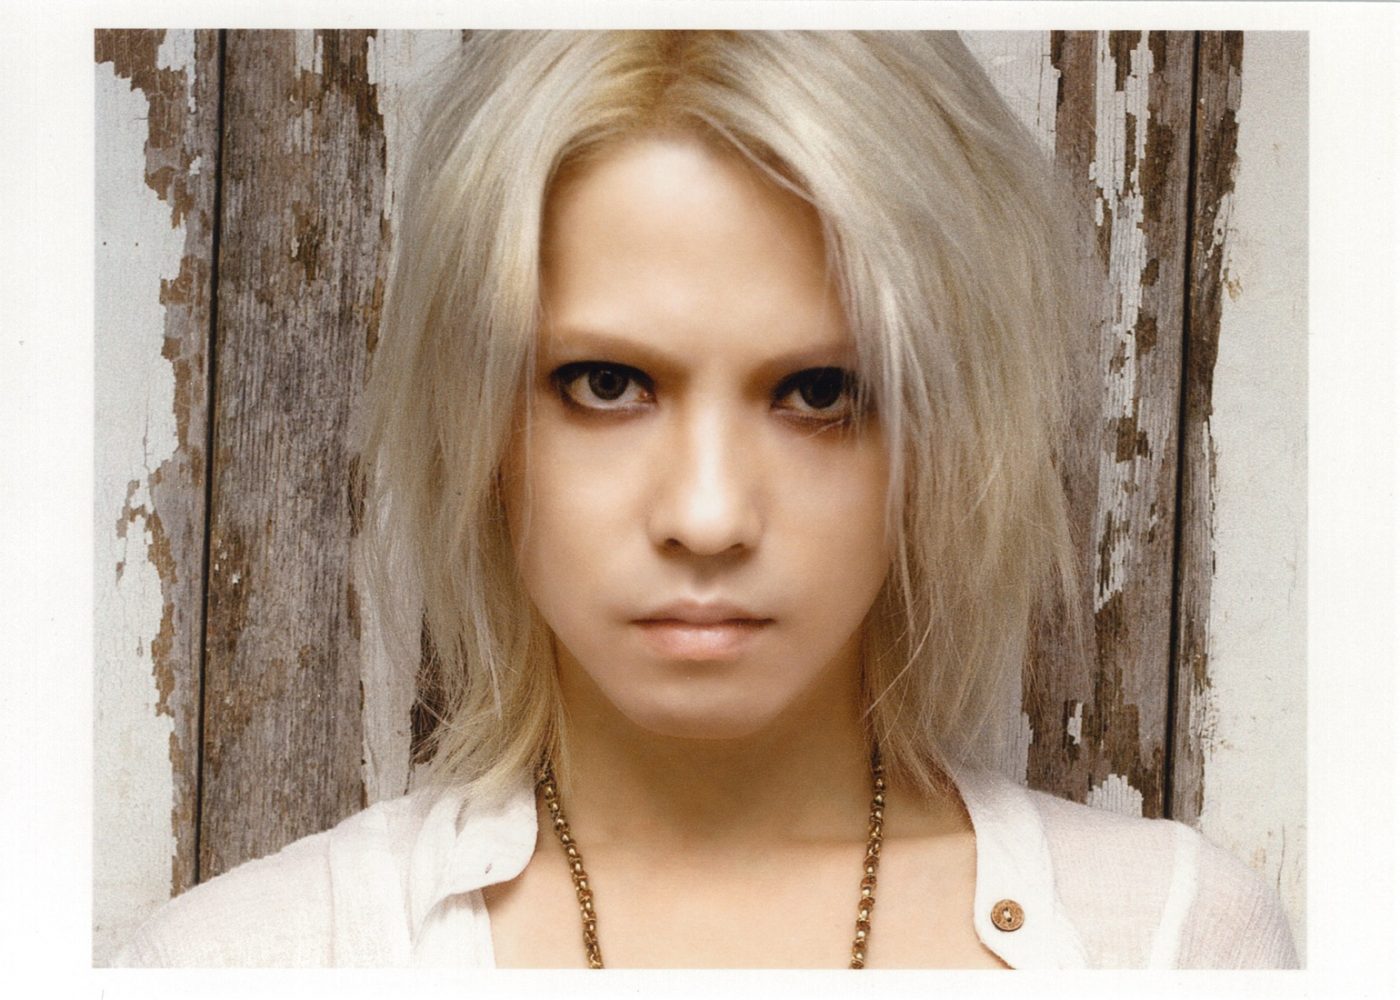 HYDE、『HYDE COMPLETE BOX 2001-2003』の商品のヴィジュアルを一部公開